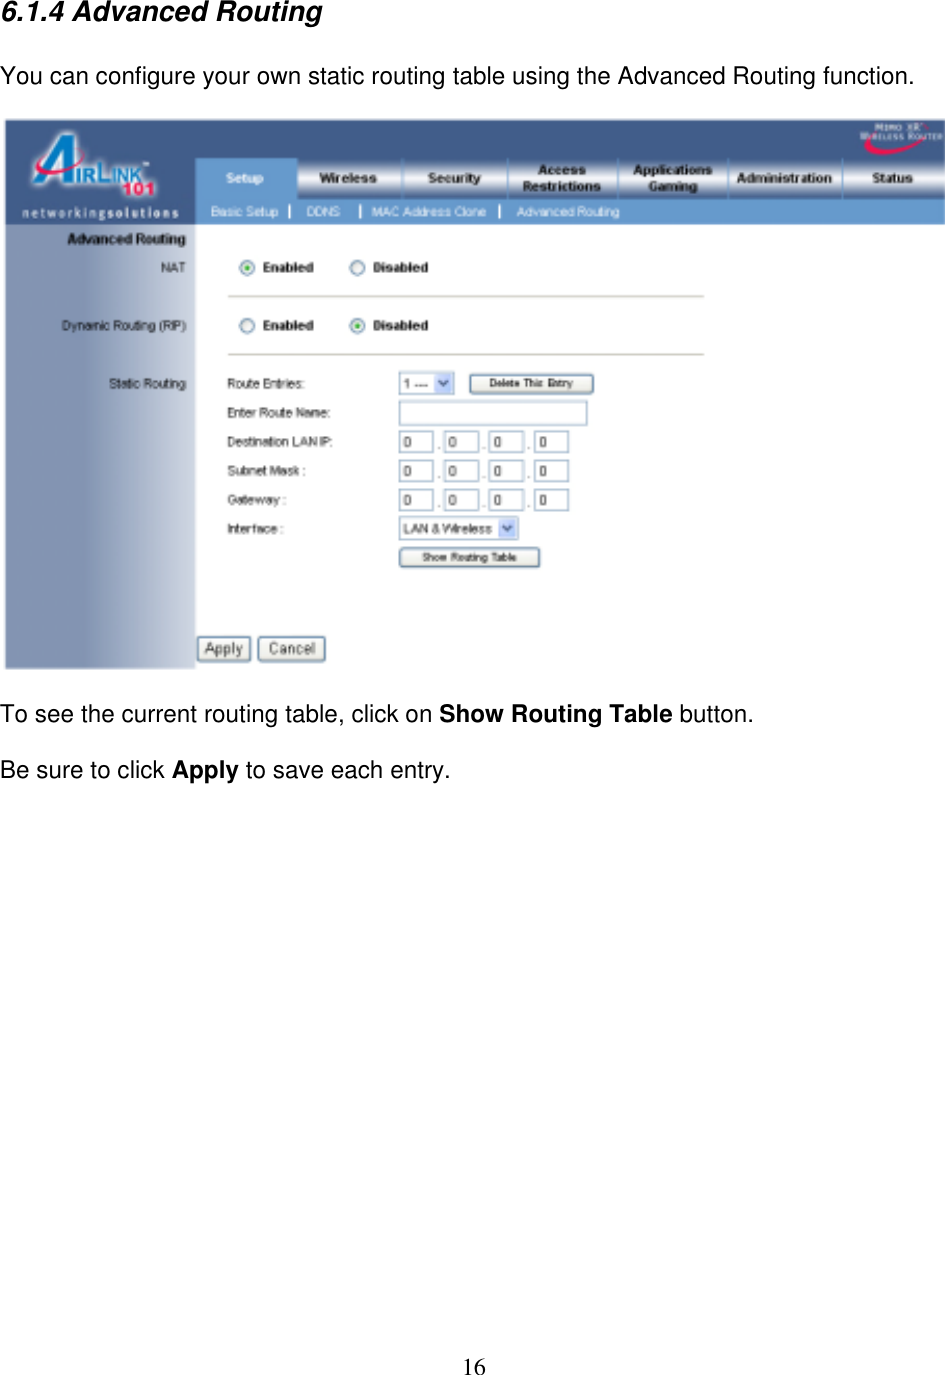 16 6.1.4 Advanced Routing  You can configure your own static routing table using the Advanced Routing function.    To see the current routing table, click on Show Routing Table button.  Be sure to click Apply to save each entry.                   